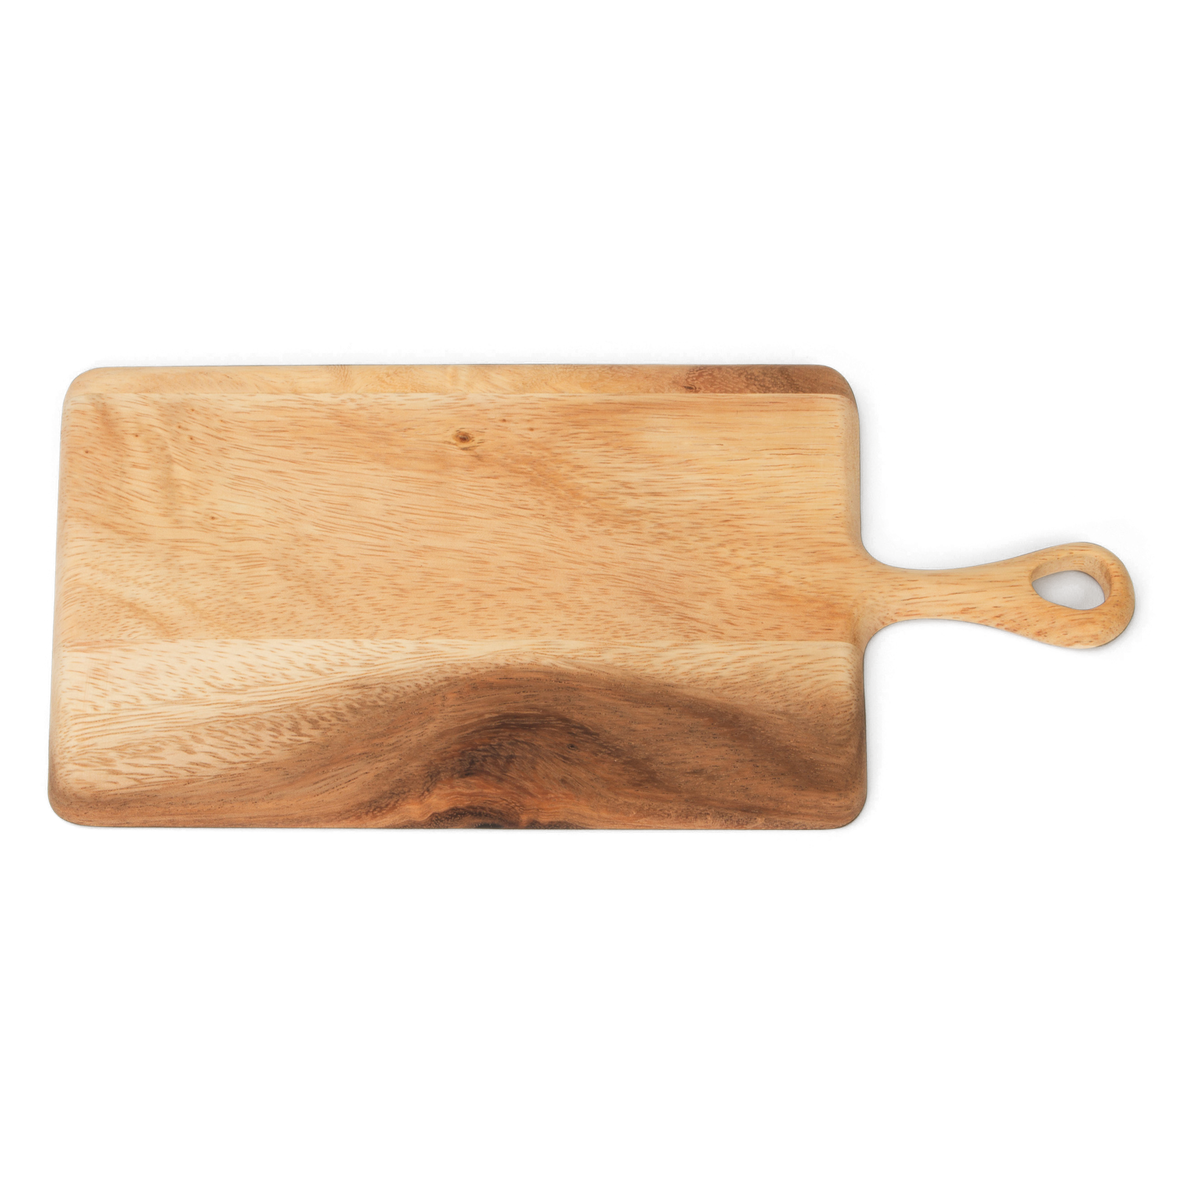 Made from solid acacia wood, this board is highly durable and water resistant.